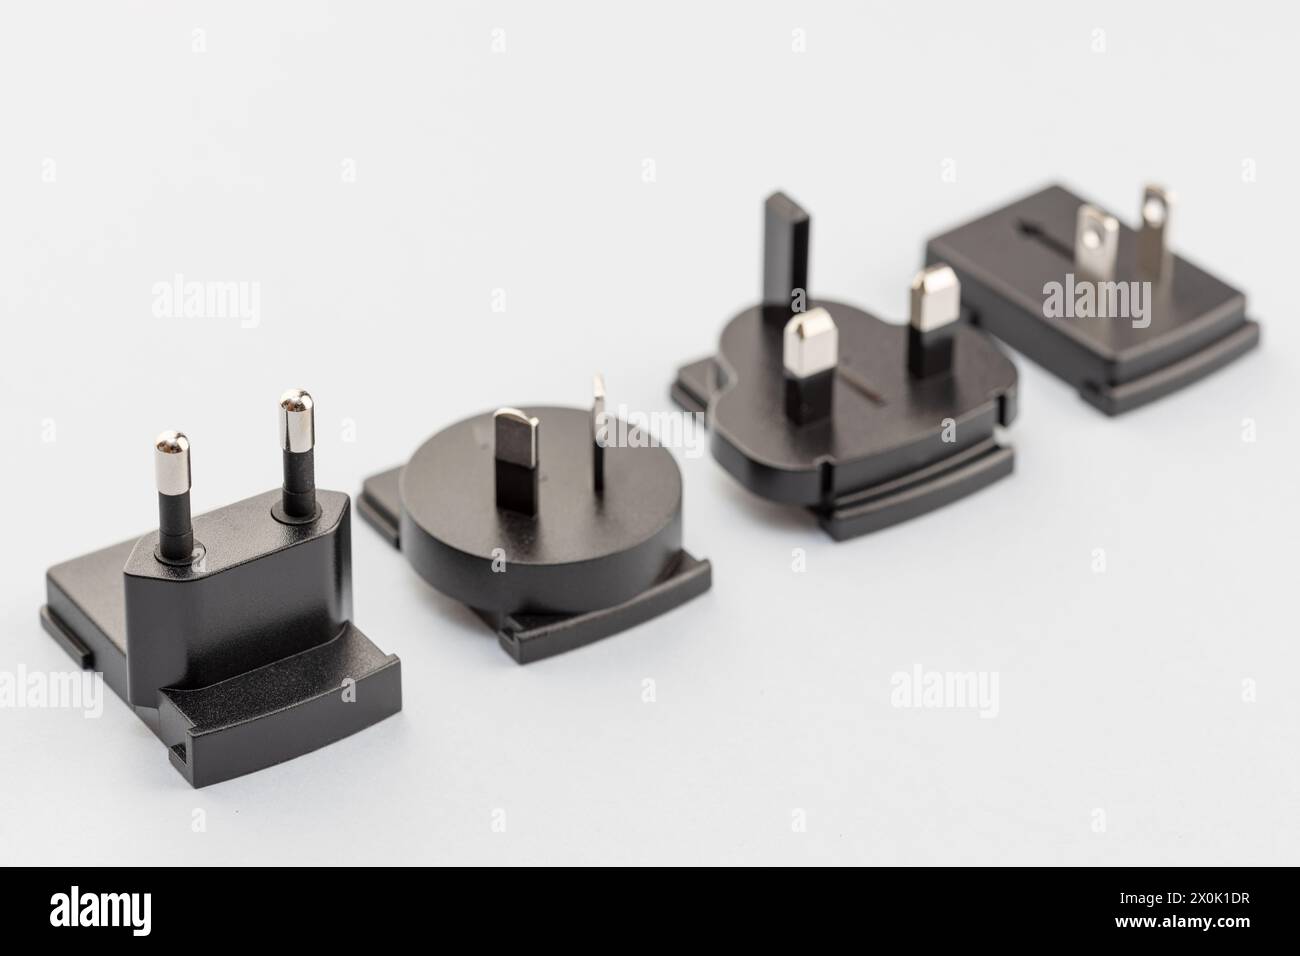 Variety of electrical plugs from different regions worldwide isolated on gray background Stock Photo